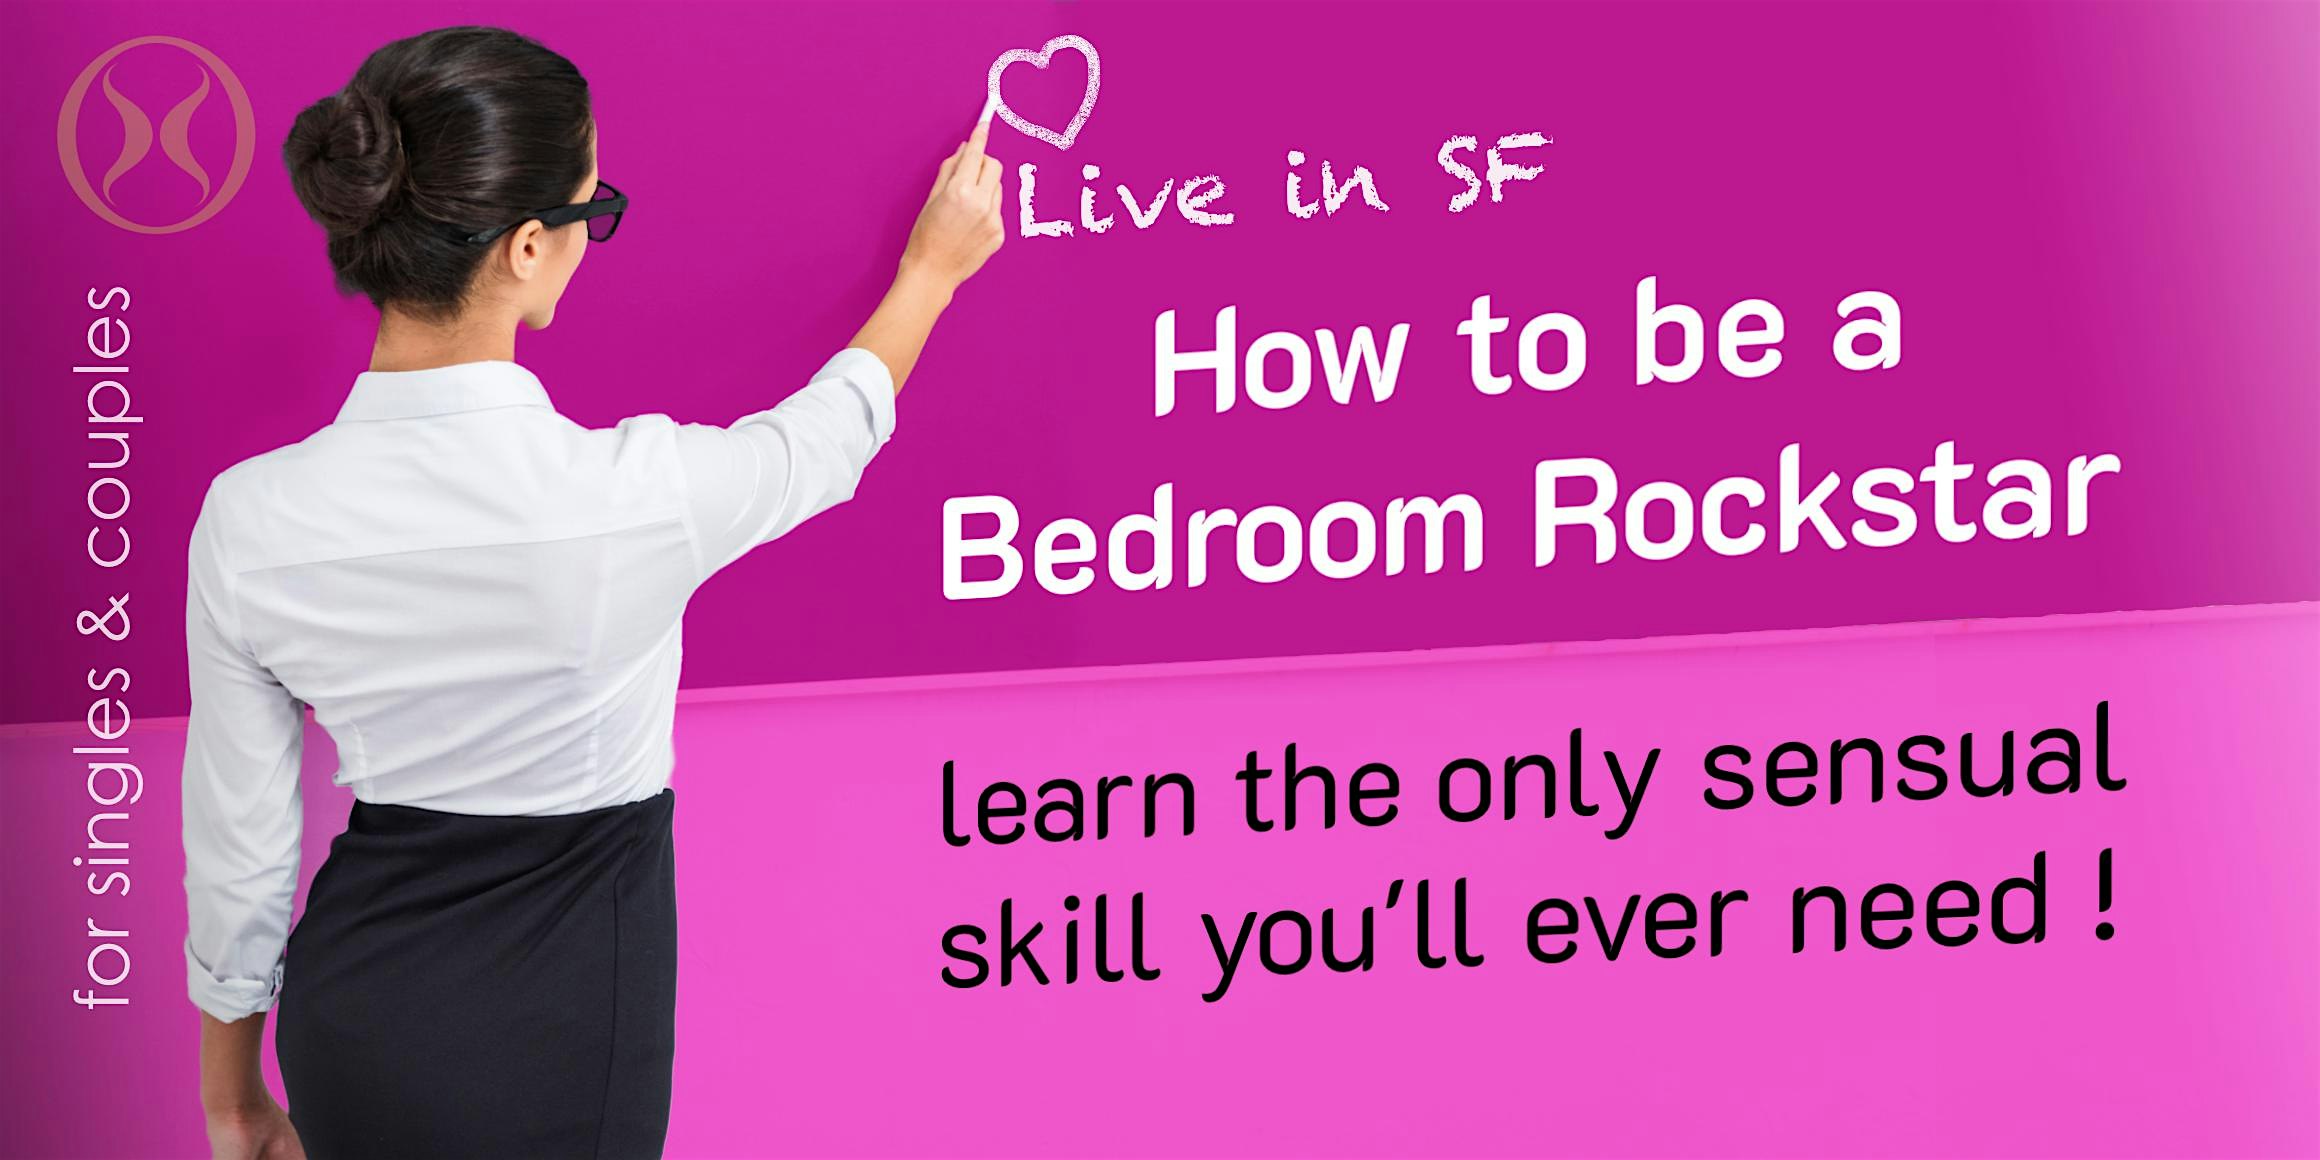 How to be a Bedroom Rockstar- the only sensual skill you will ever need!